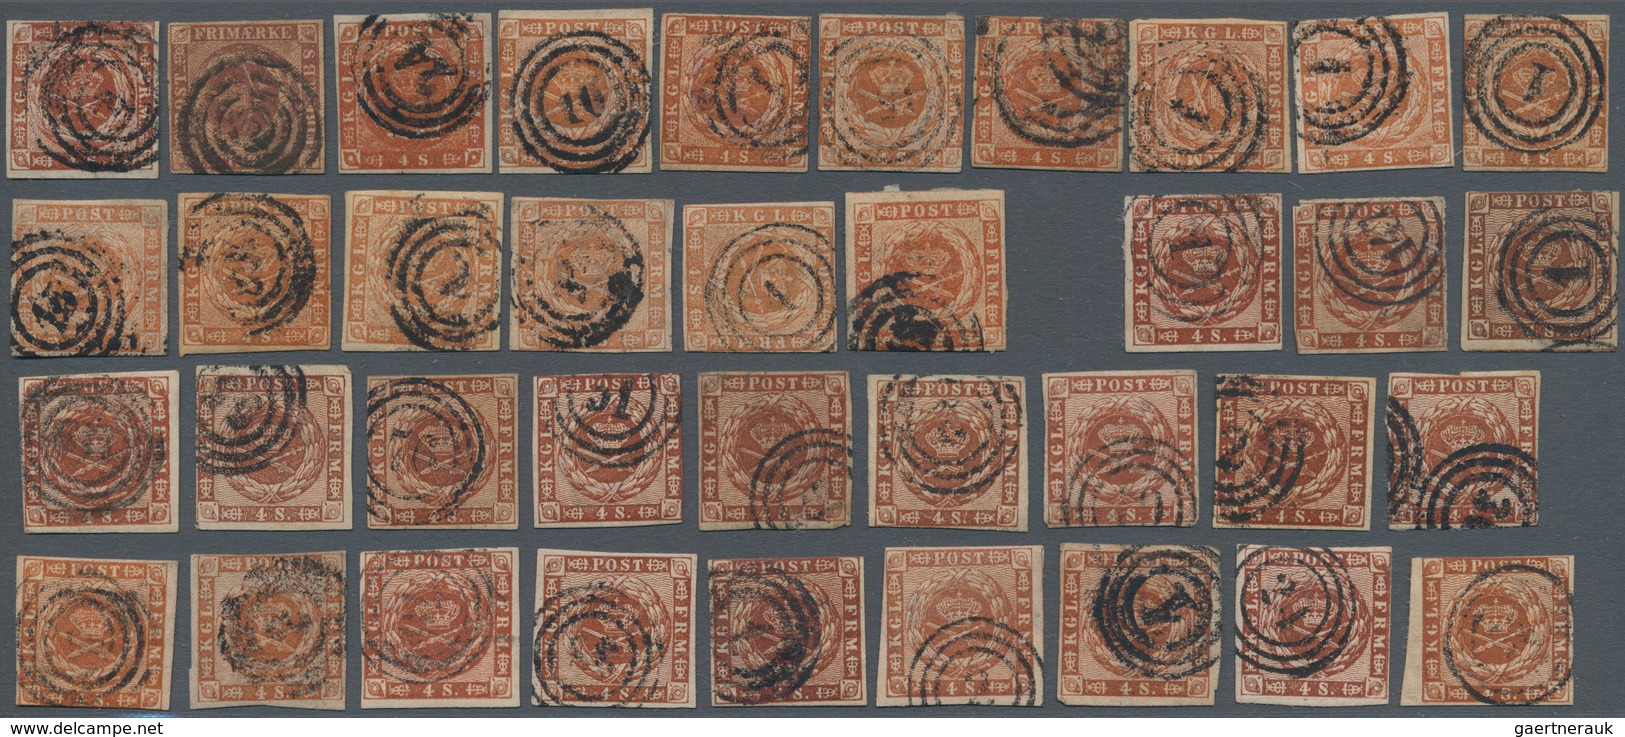 Dänemark: 1854-62, Group Of 73 Used Stamps Of 4s., With 16 From The 1854-57 Issues And 57 Of 1858-62 - Briefe U. Dokumente